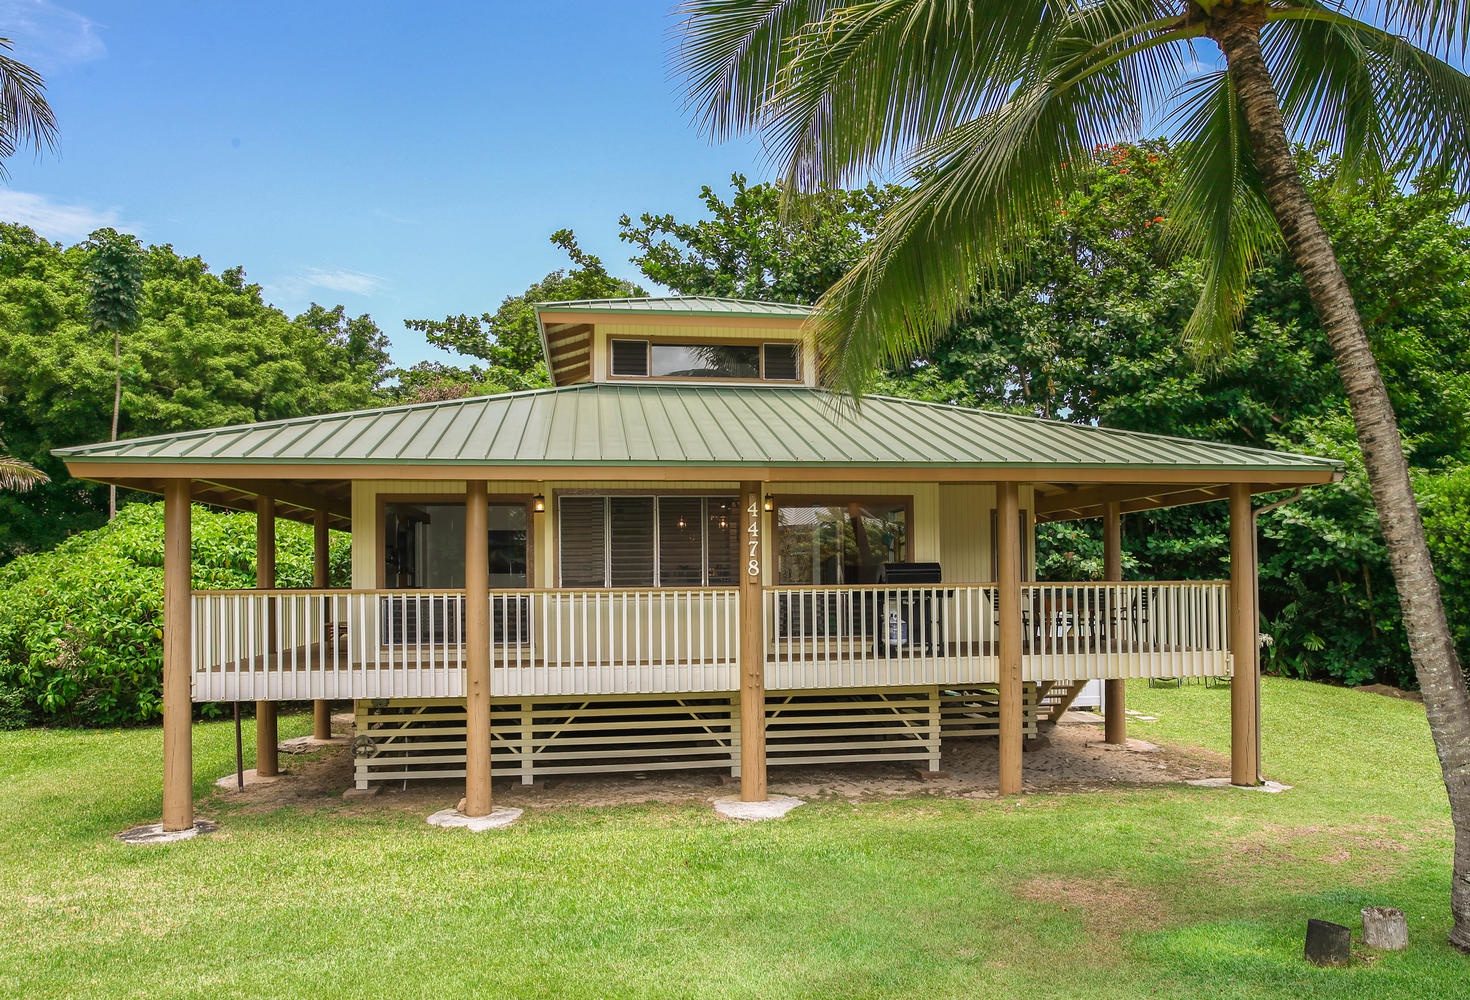 Hanalei Vacation Rentals, Hallor House TVNC #5147 - Hallor house view of front side of the house